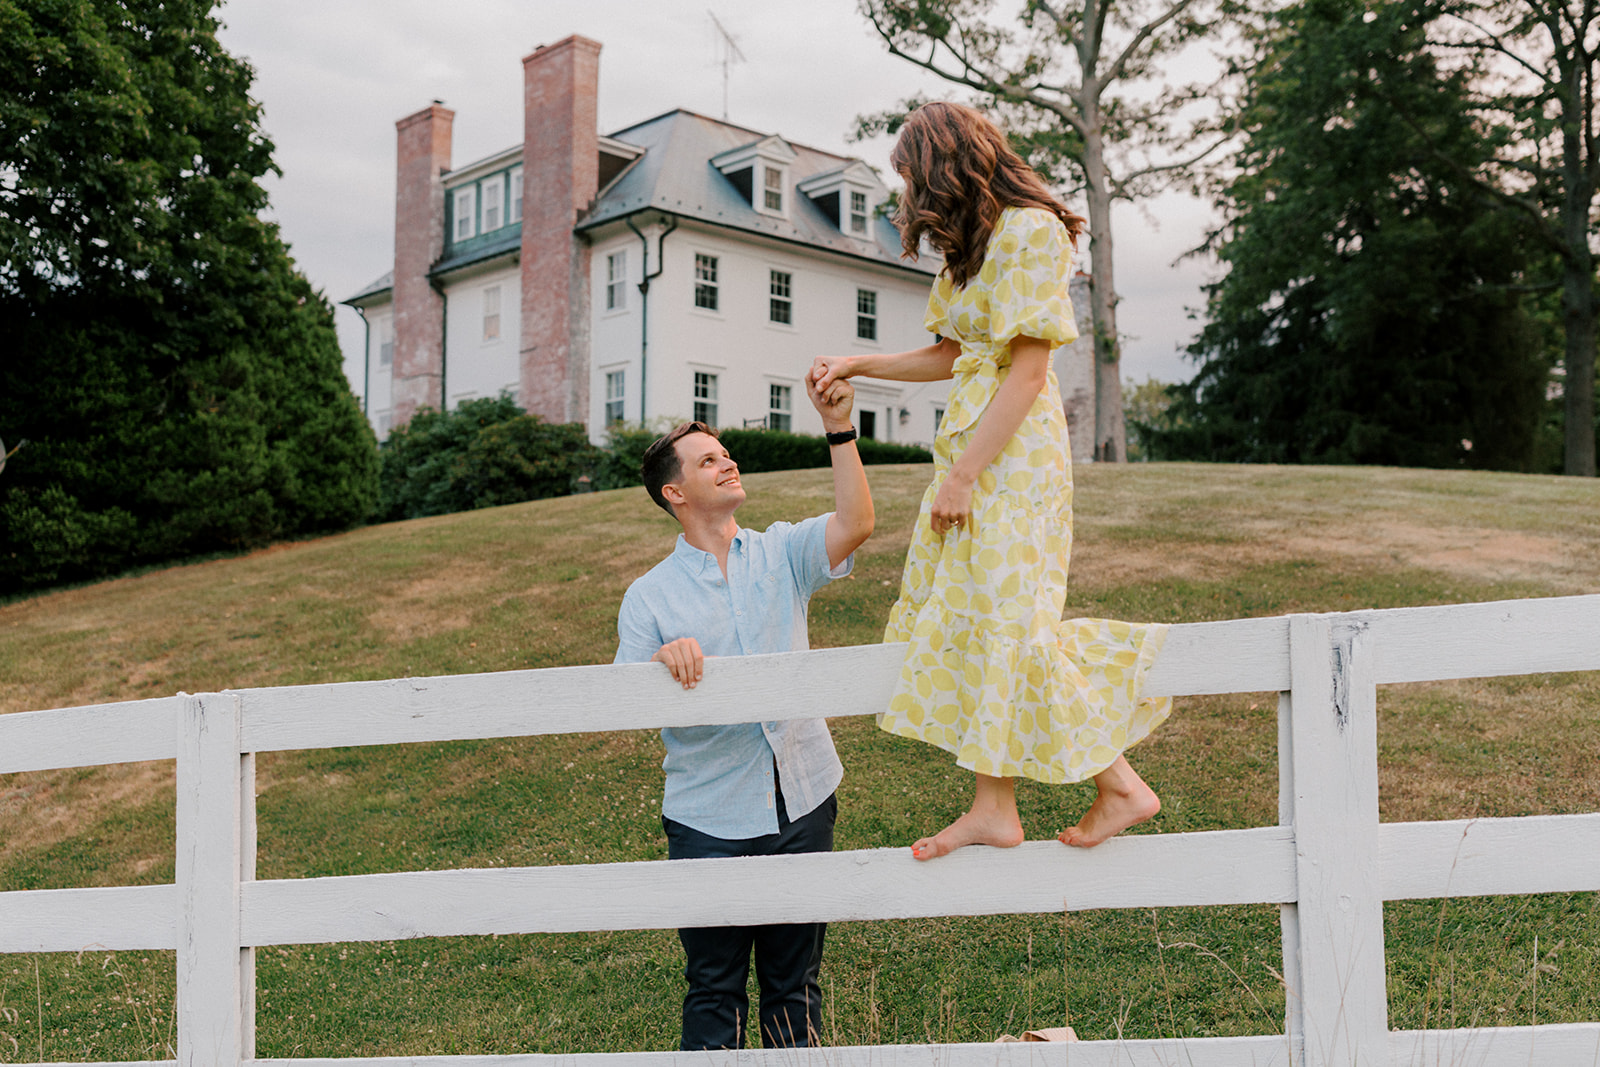 A couple hops over fence during engagement photos in front of a country farm house estate.